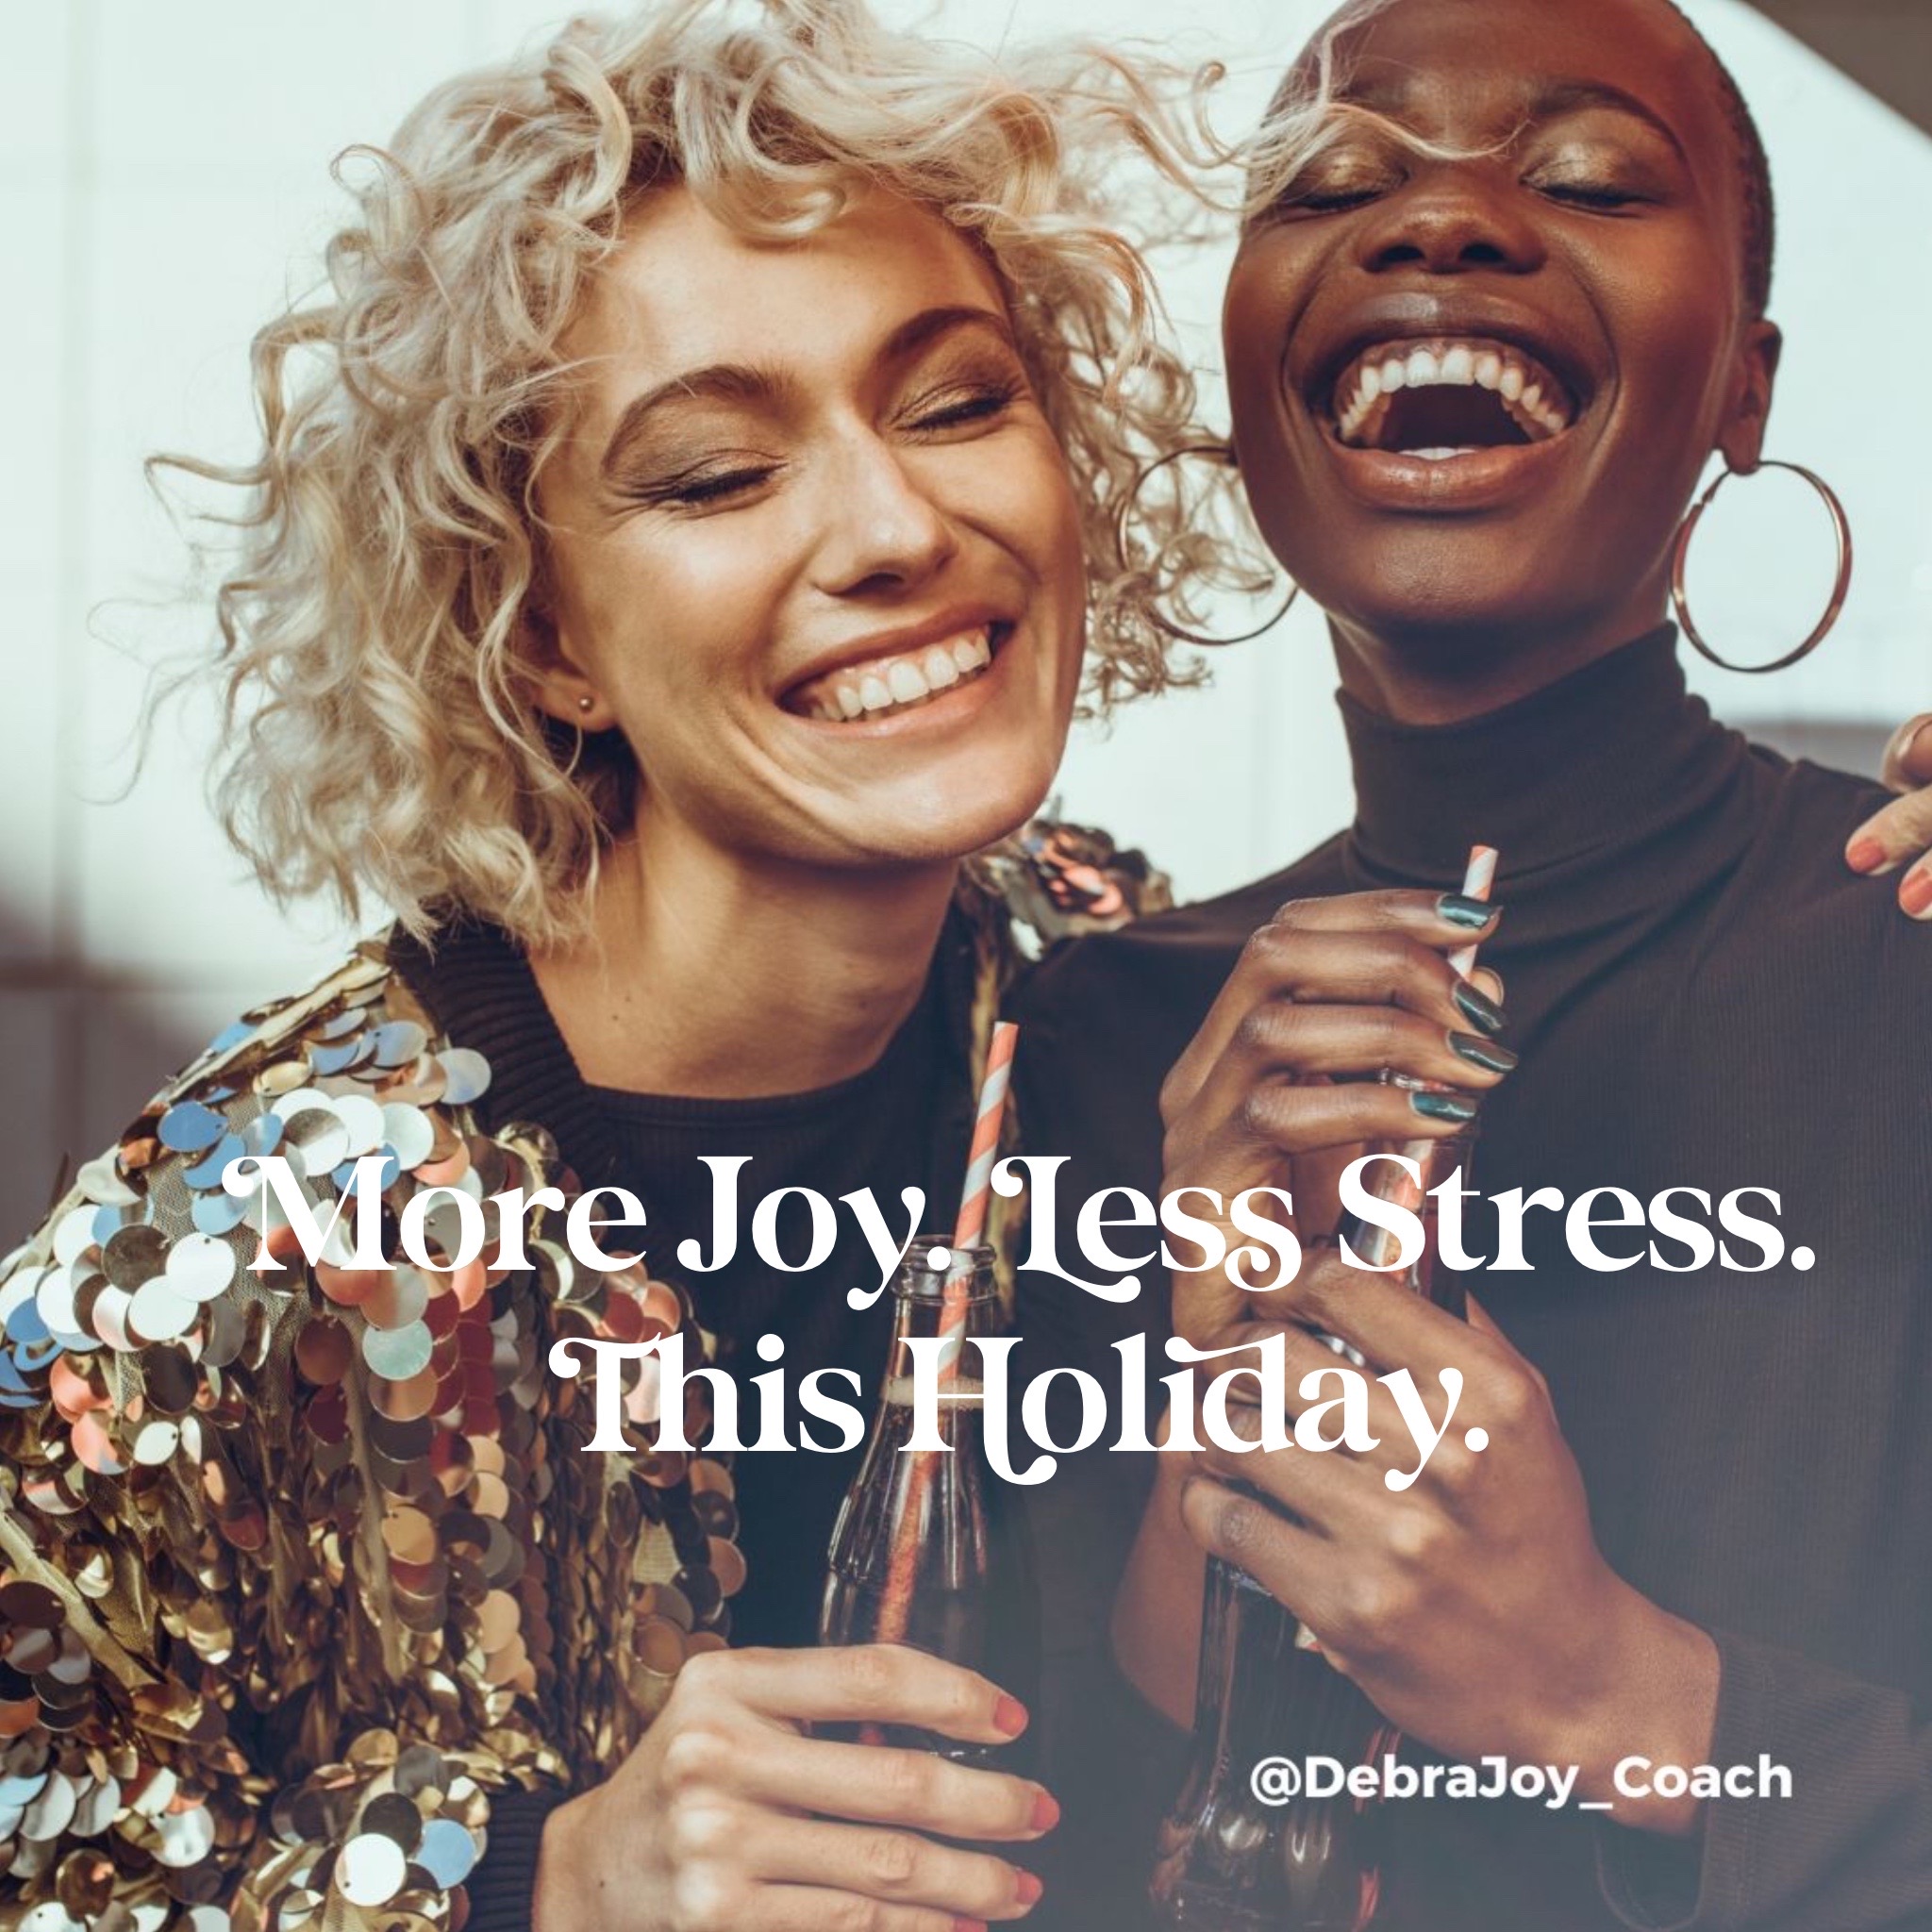 More joy and less stress for the holidays